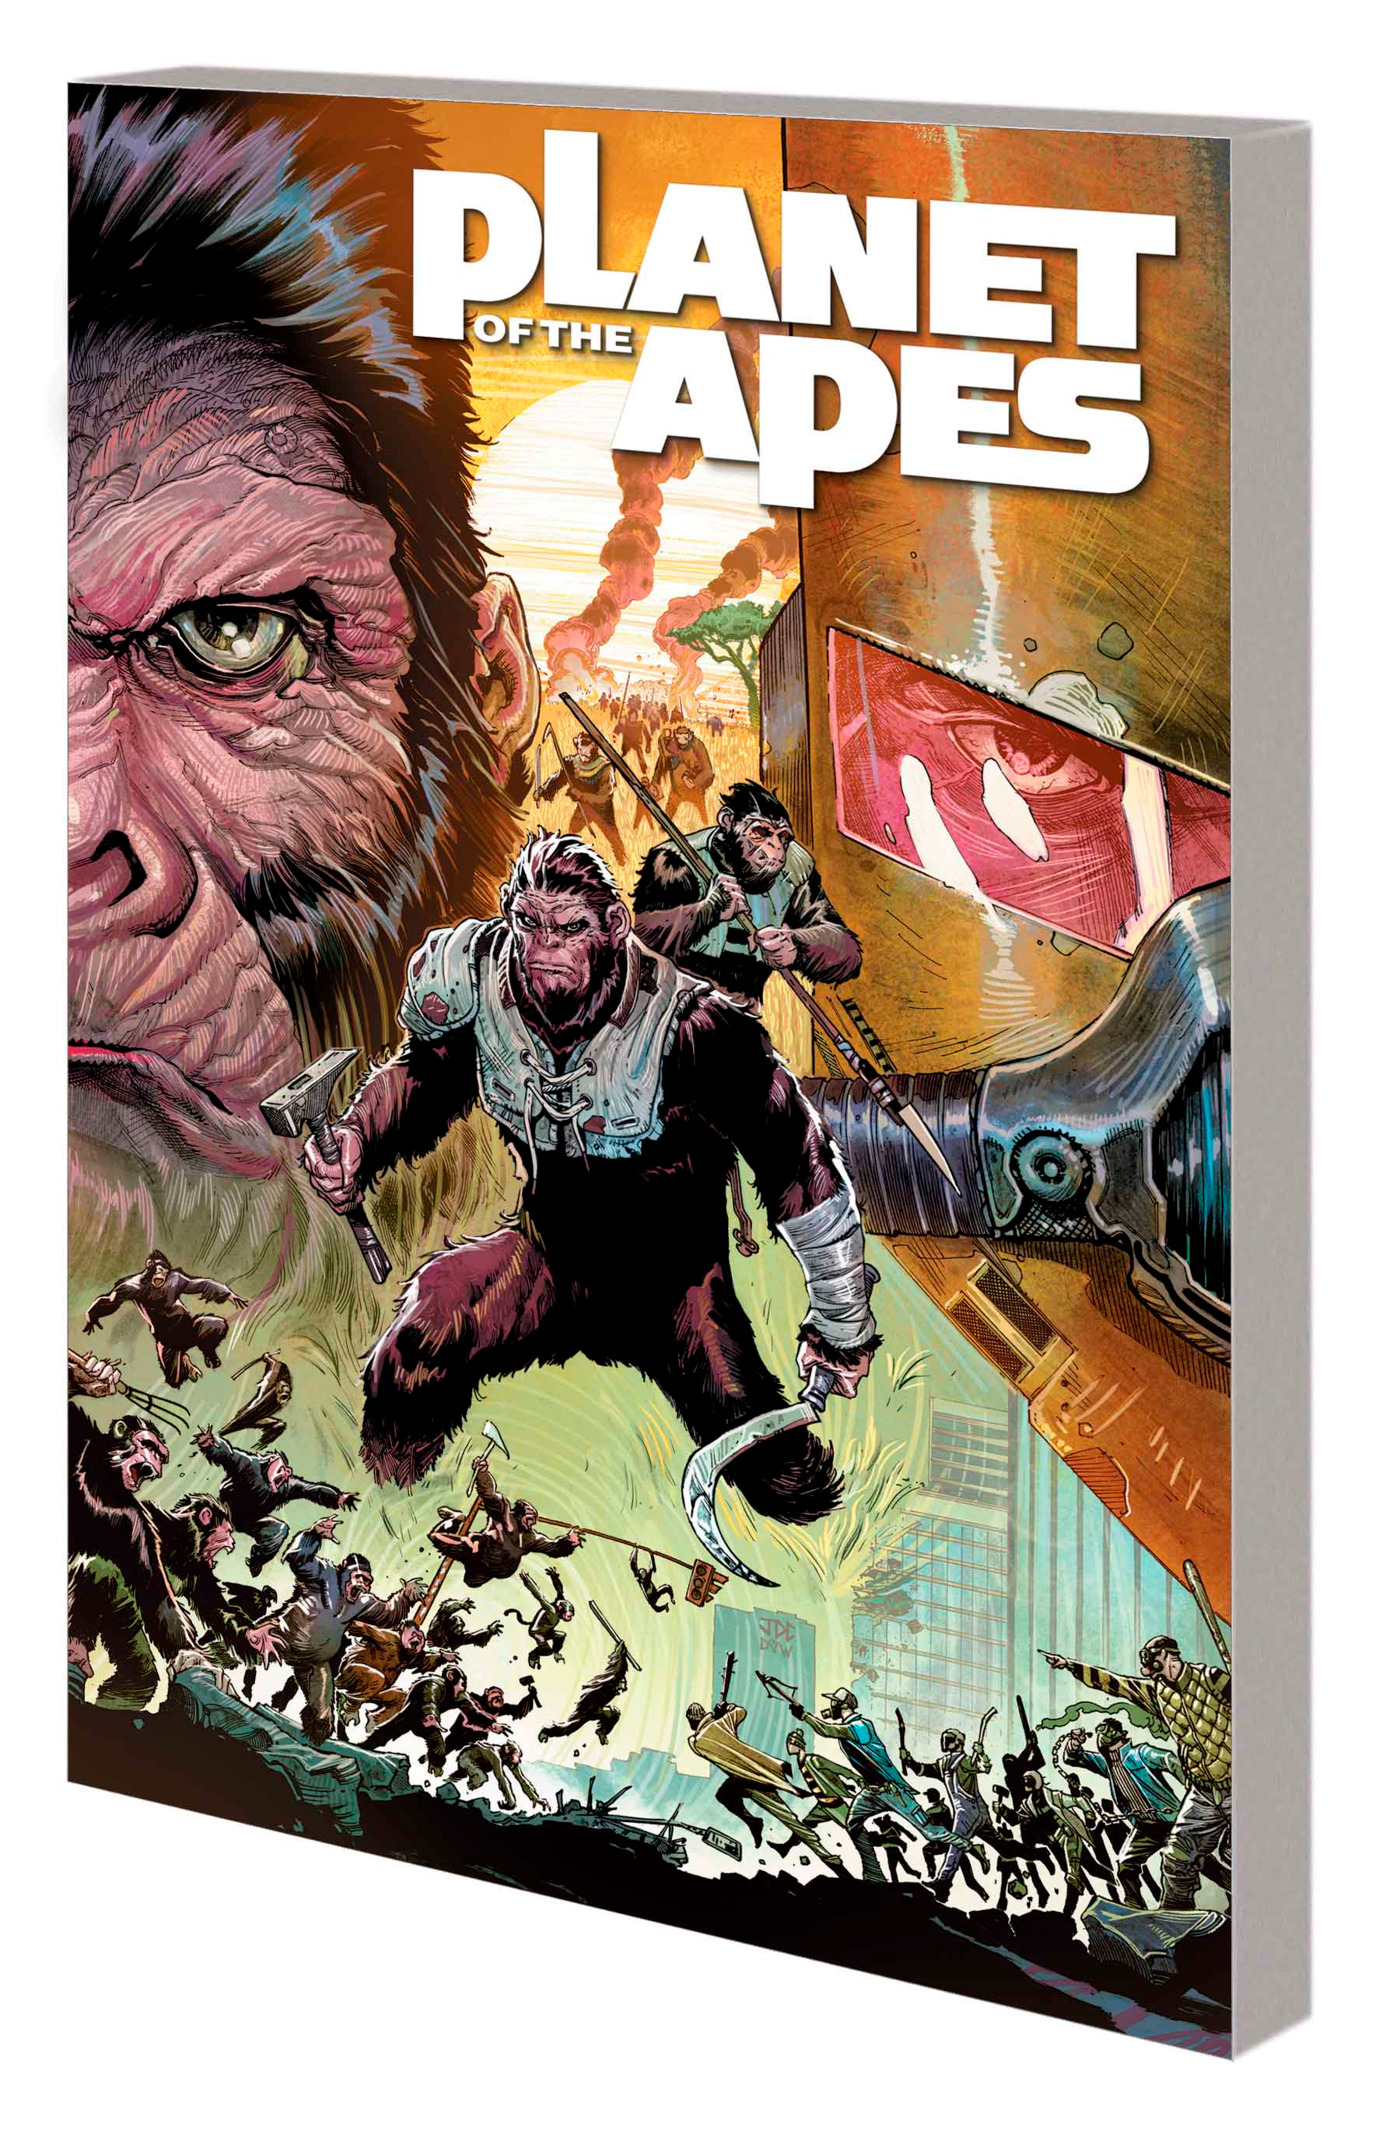 PLANET OF THE APES: FALL OF MAN | Walker, David F. (Auteur) | Wachter, Dave (Illustrateur)